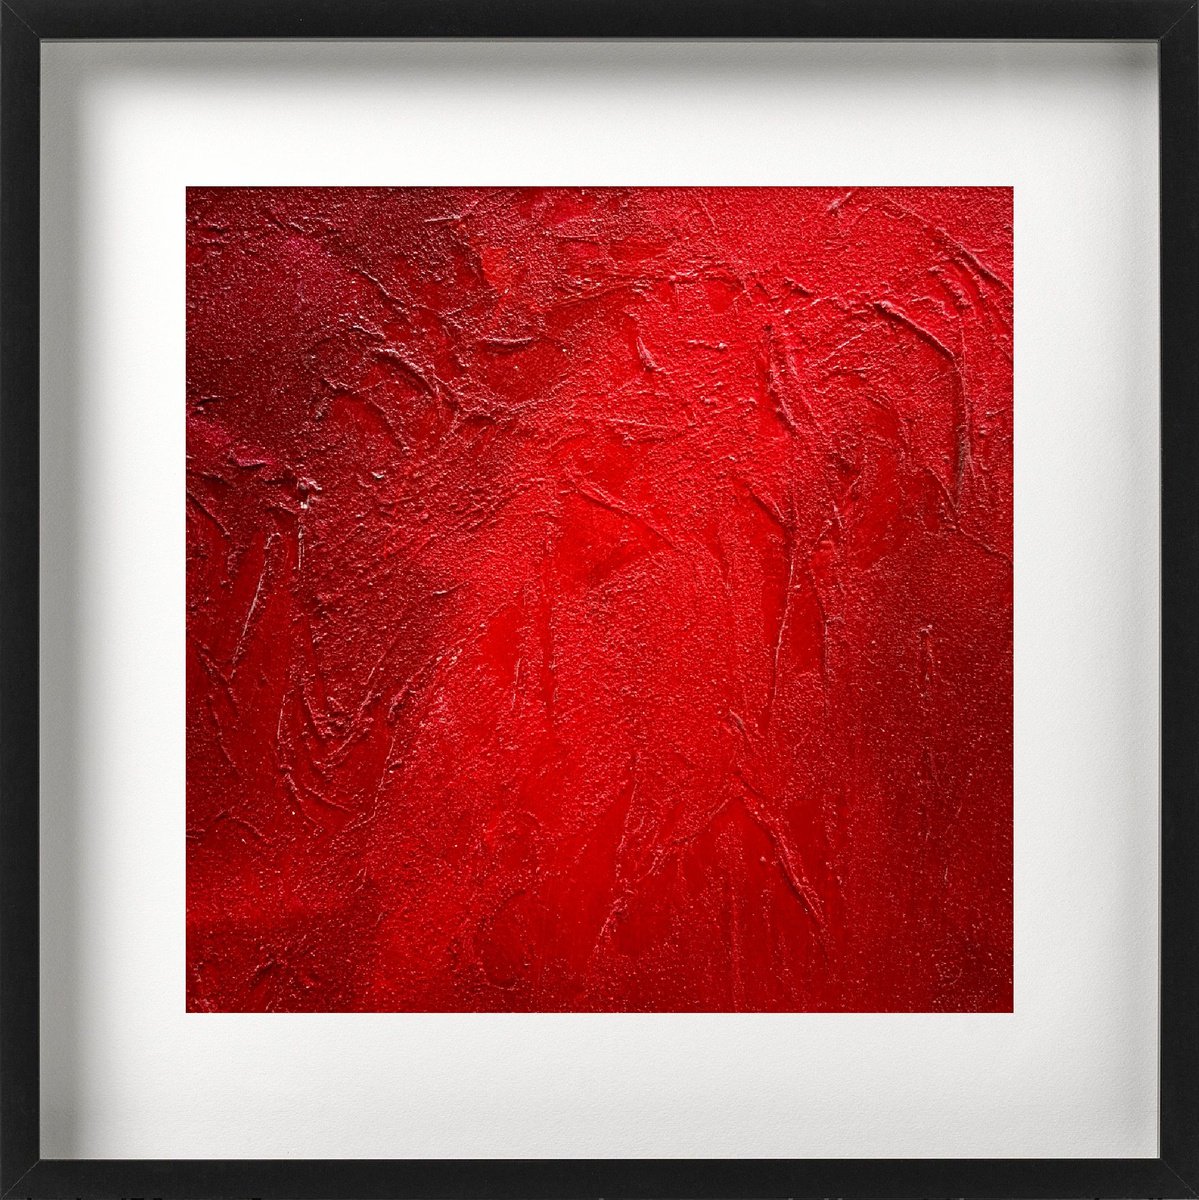 Abstraction No. 02920-1 red textured by Anita Kaufmann